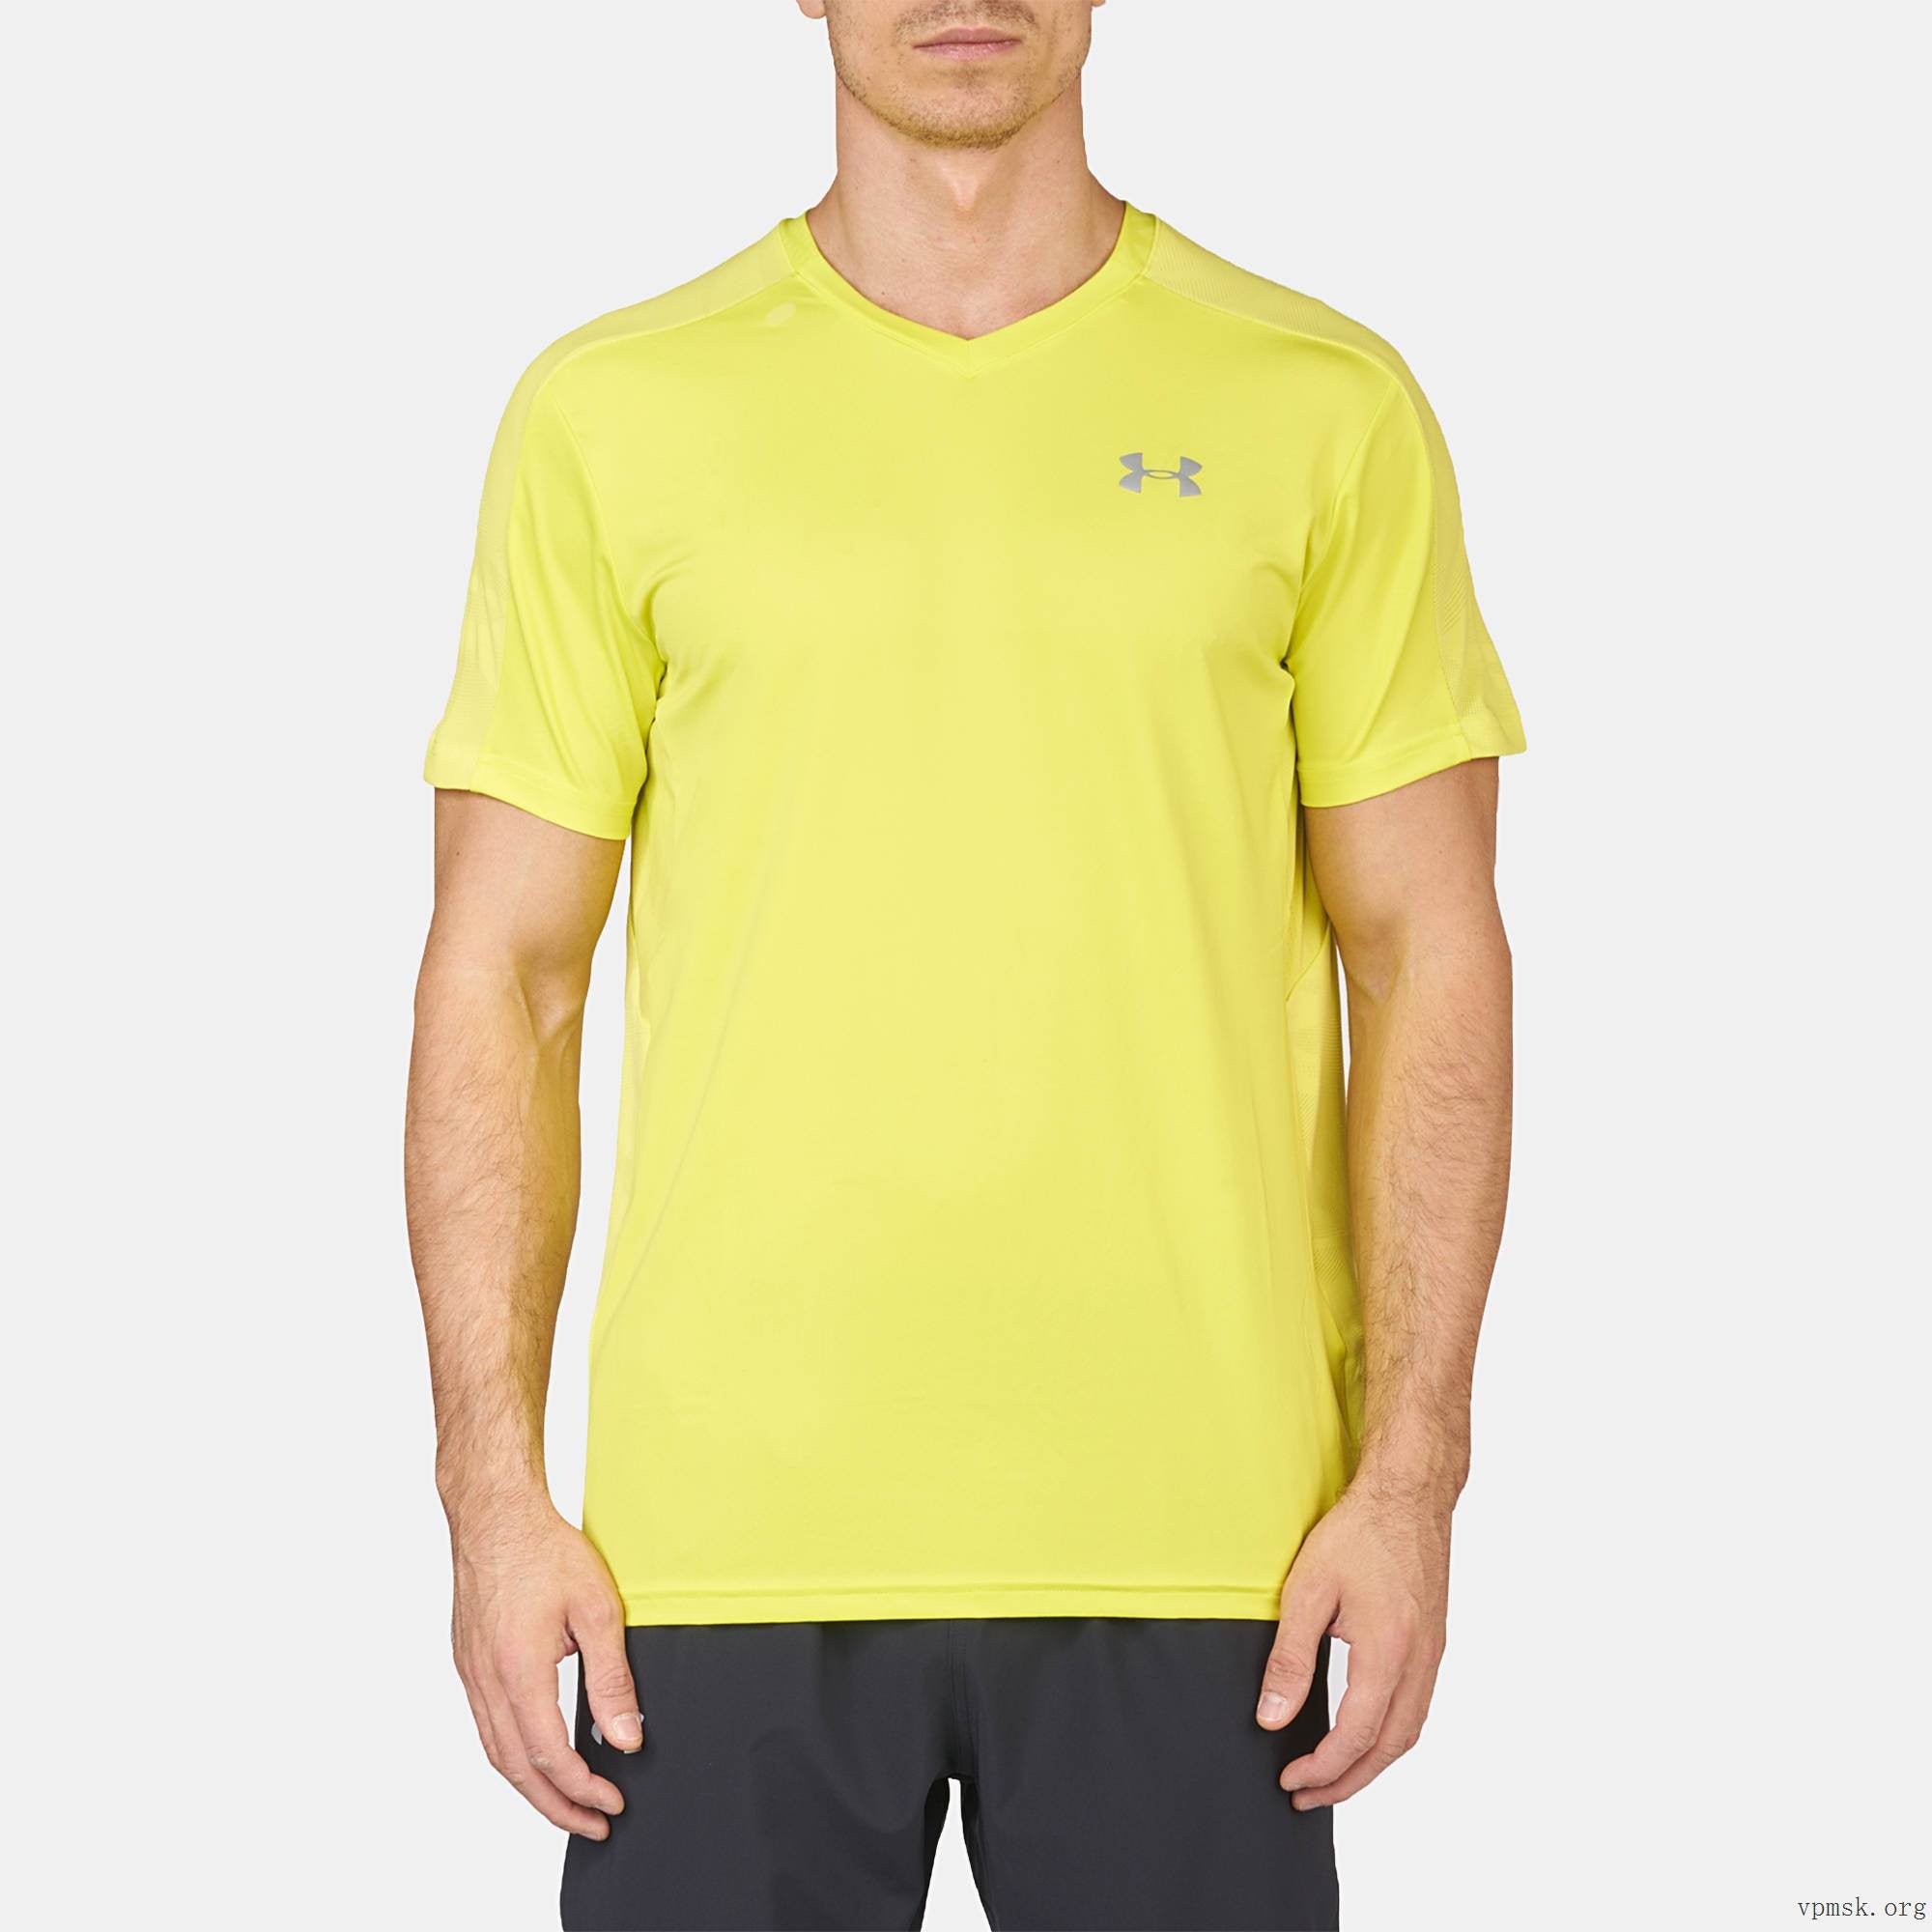 Under Armour CoolSwitch Run Short Sleeve Mens Top - Yellow 1284965